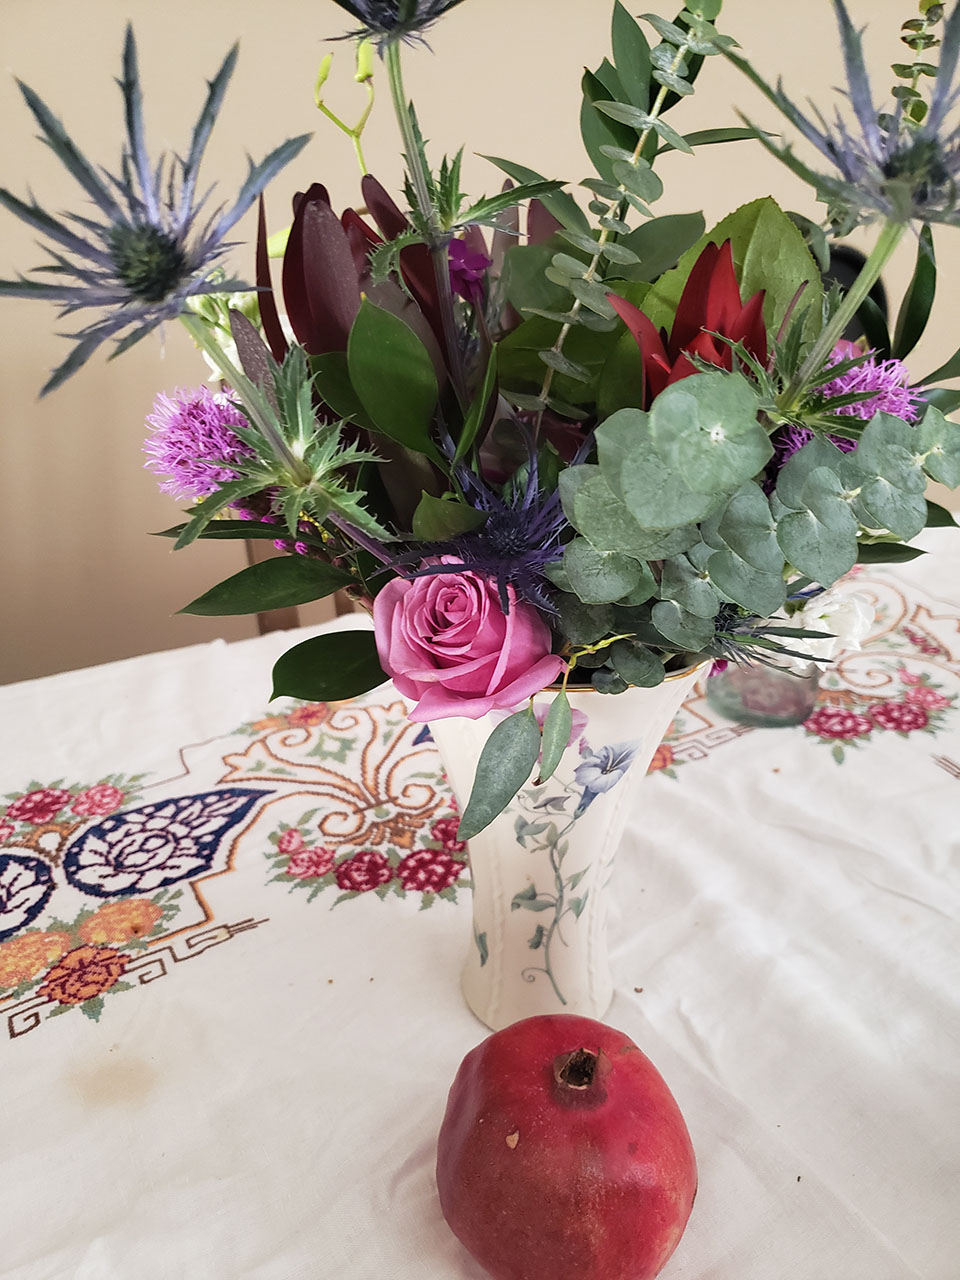 A colorful bouquet of flowers in a vase, with a red pomegranate placed in front.